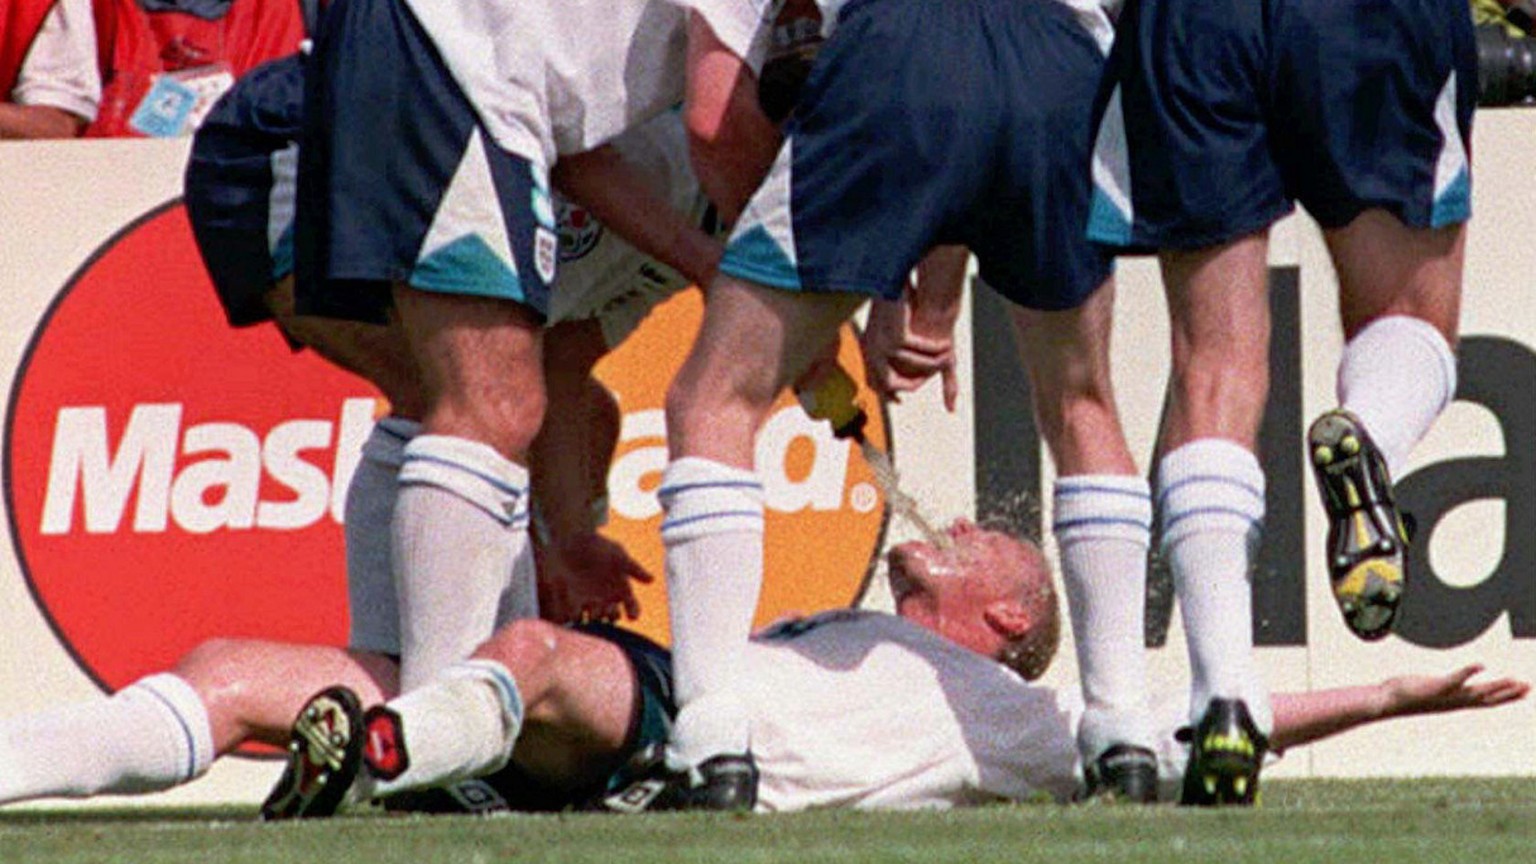 Paul Gascoigne is swamped by England teammates after scoring their second goal during their Euro 96 clash against Scotland, at Wembley, Saturday June 15 1996. England won 2-0. (AP Photo/Adam Butler)